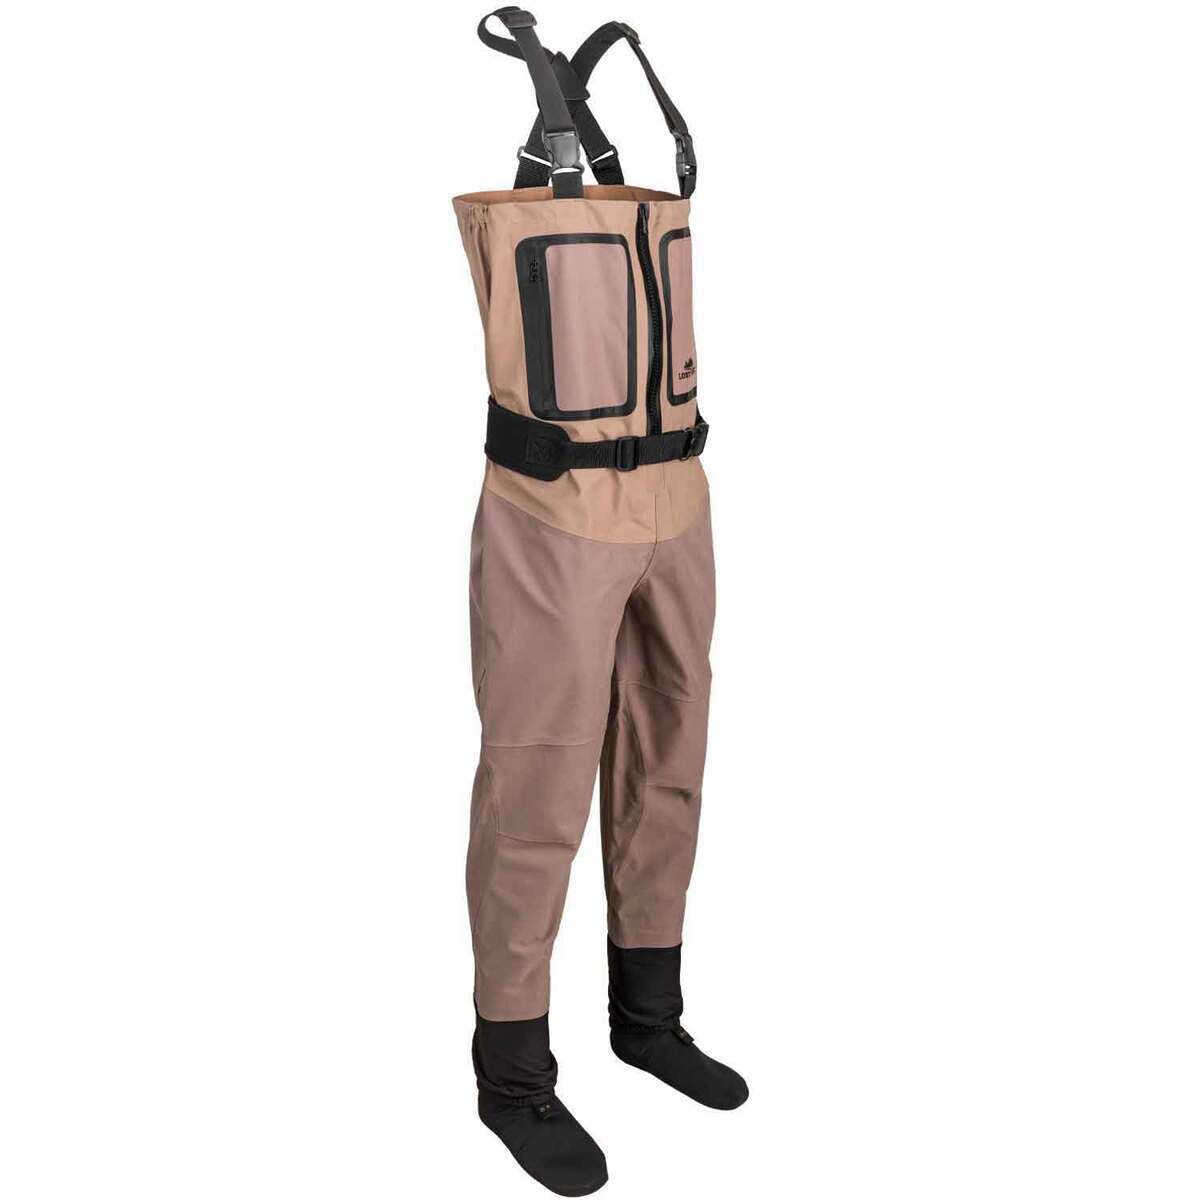 5 Best Fly Fishing Waders Under $300